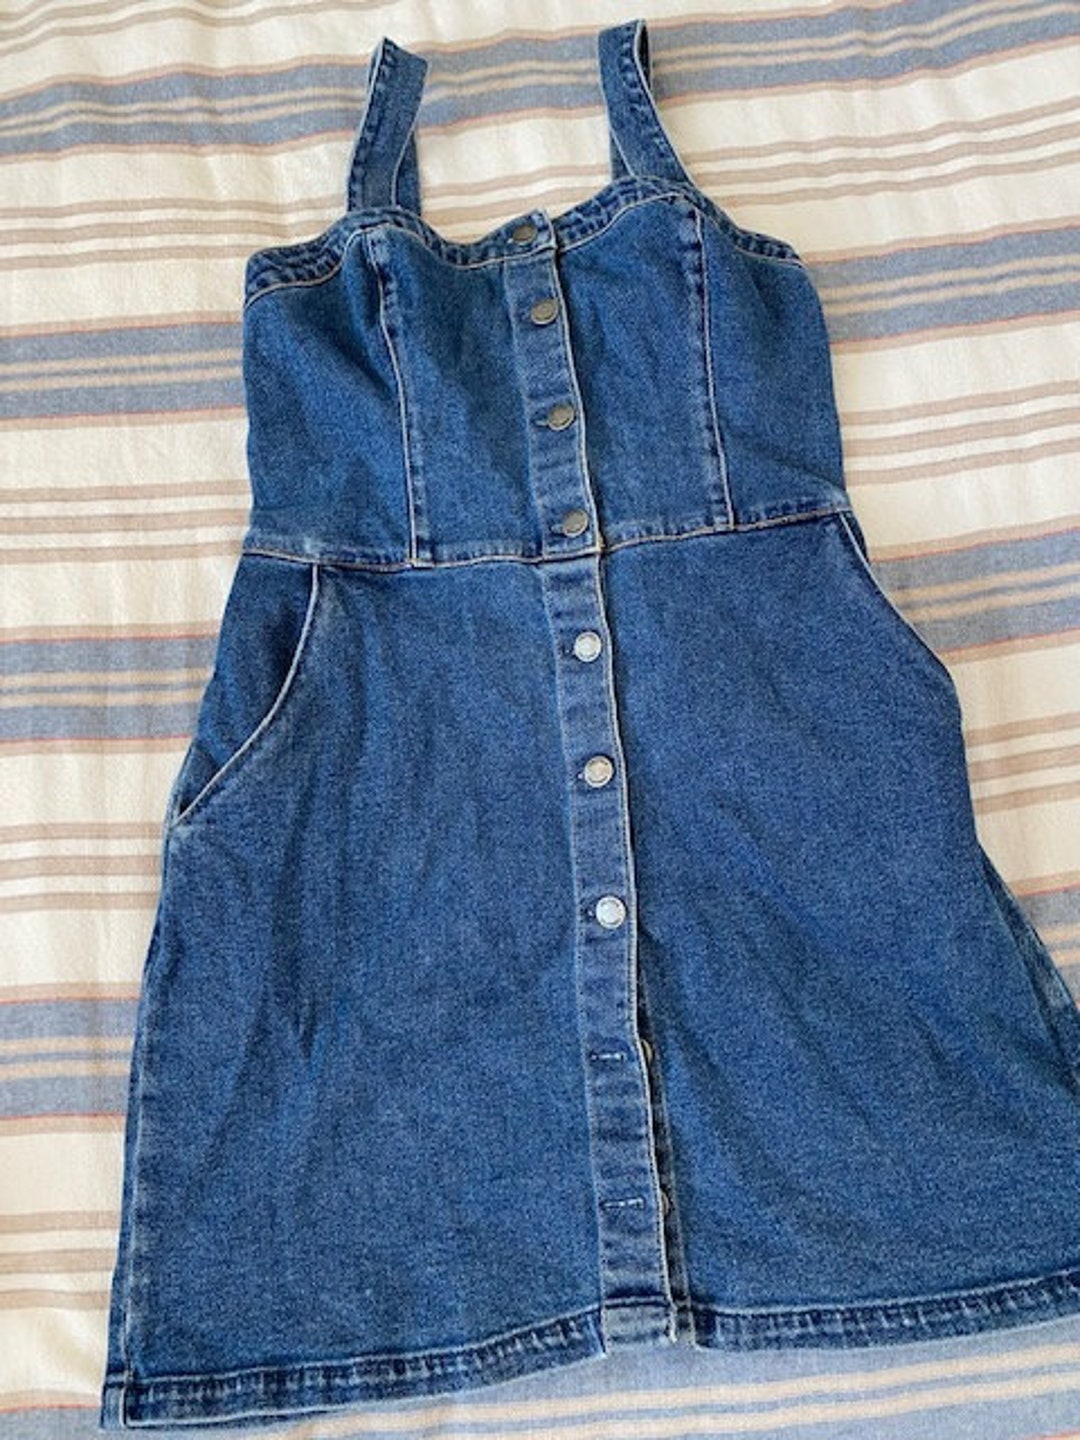 Abercrombie & Fitch Hollister California Denim Overall Jumper - Etsy